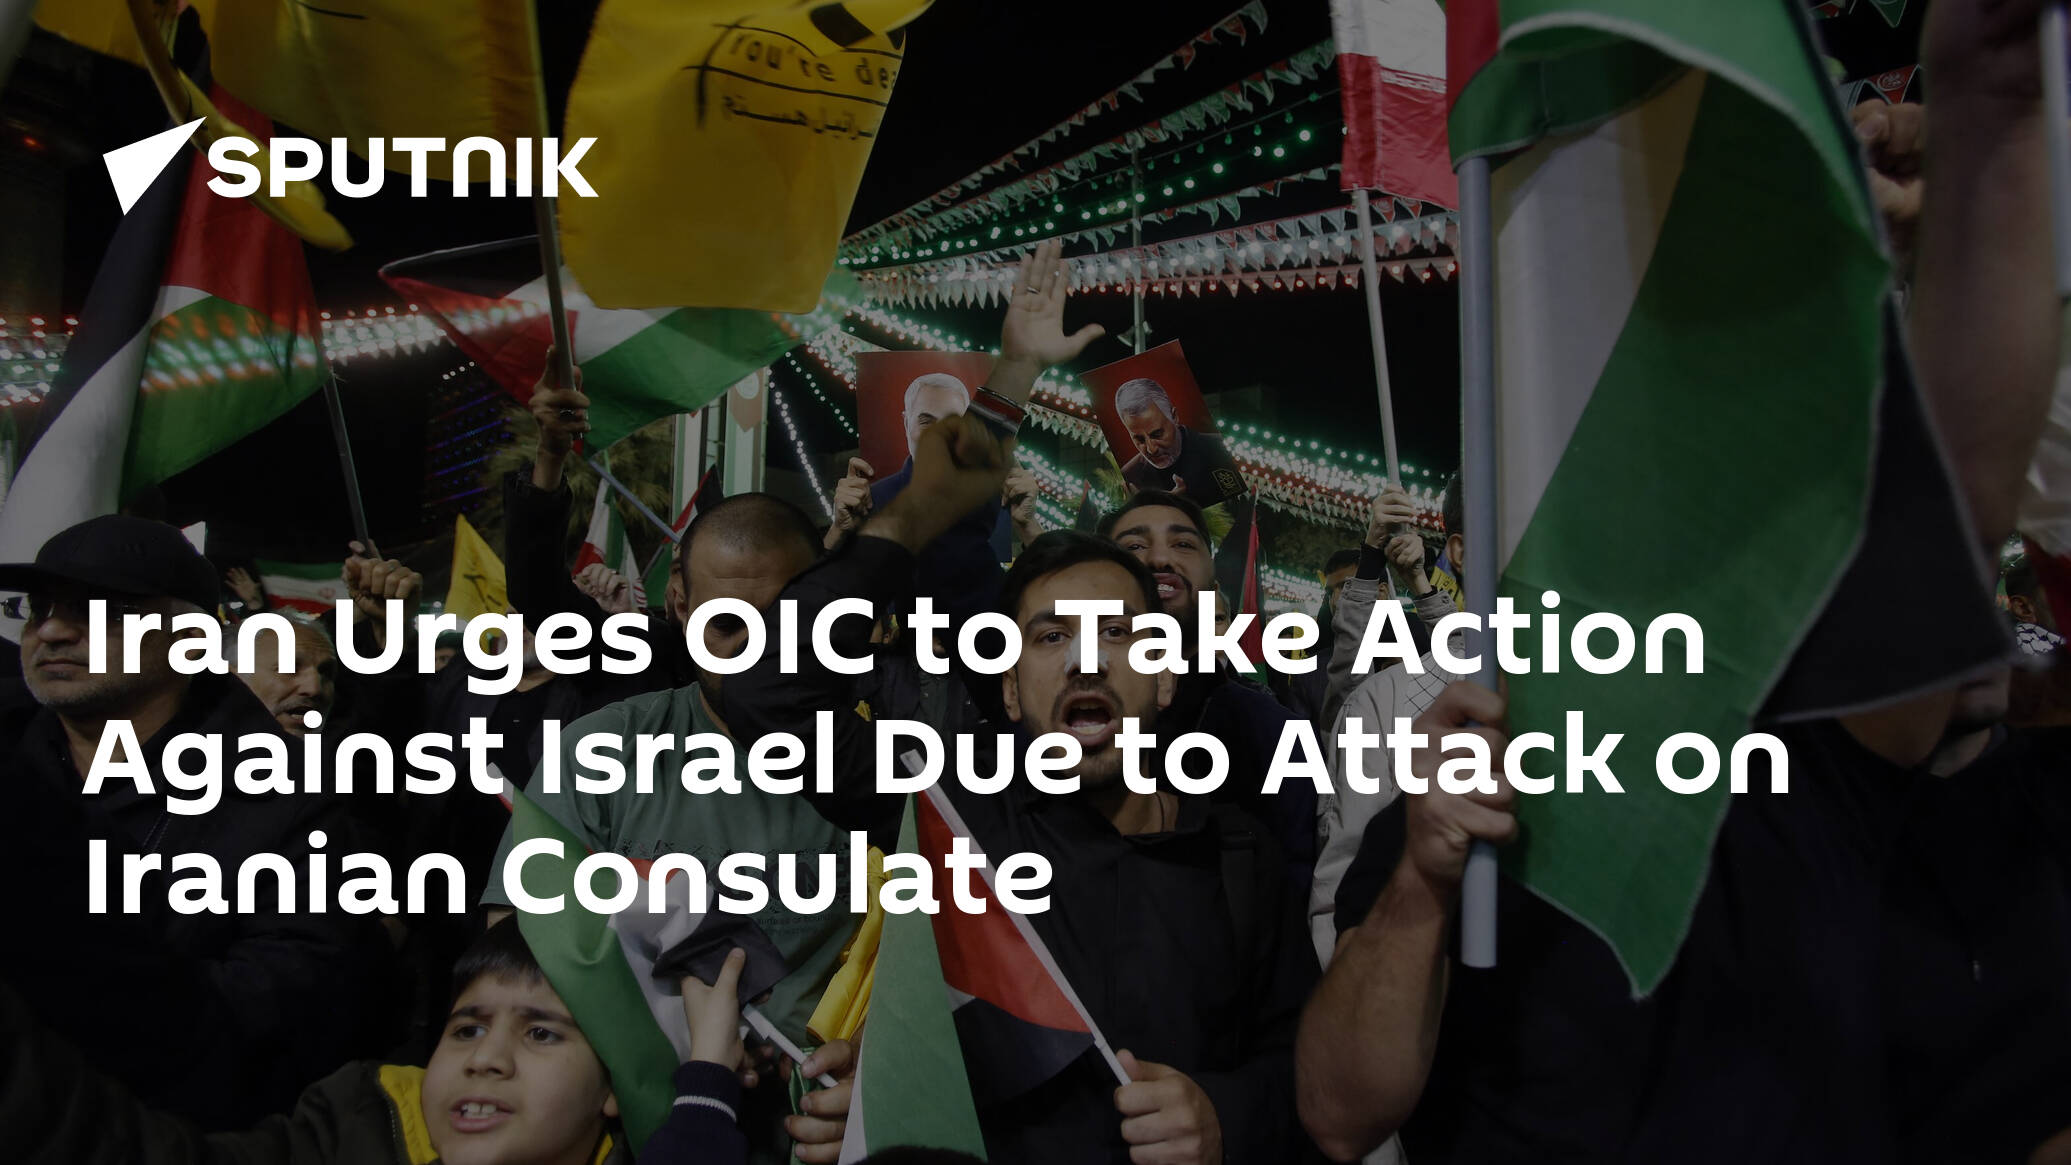 Iran Urges OIC to Take Action Against Israel Due to Attack on Iranian Consulate